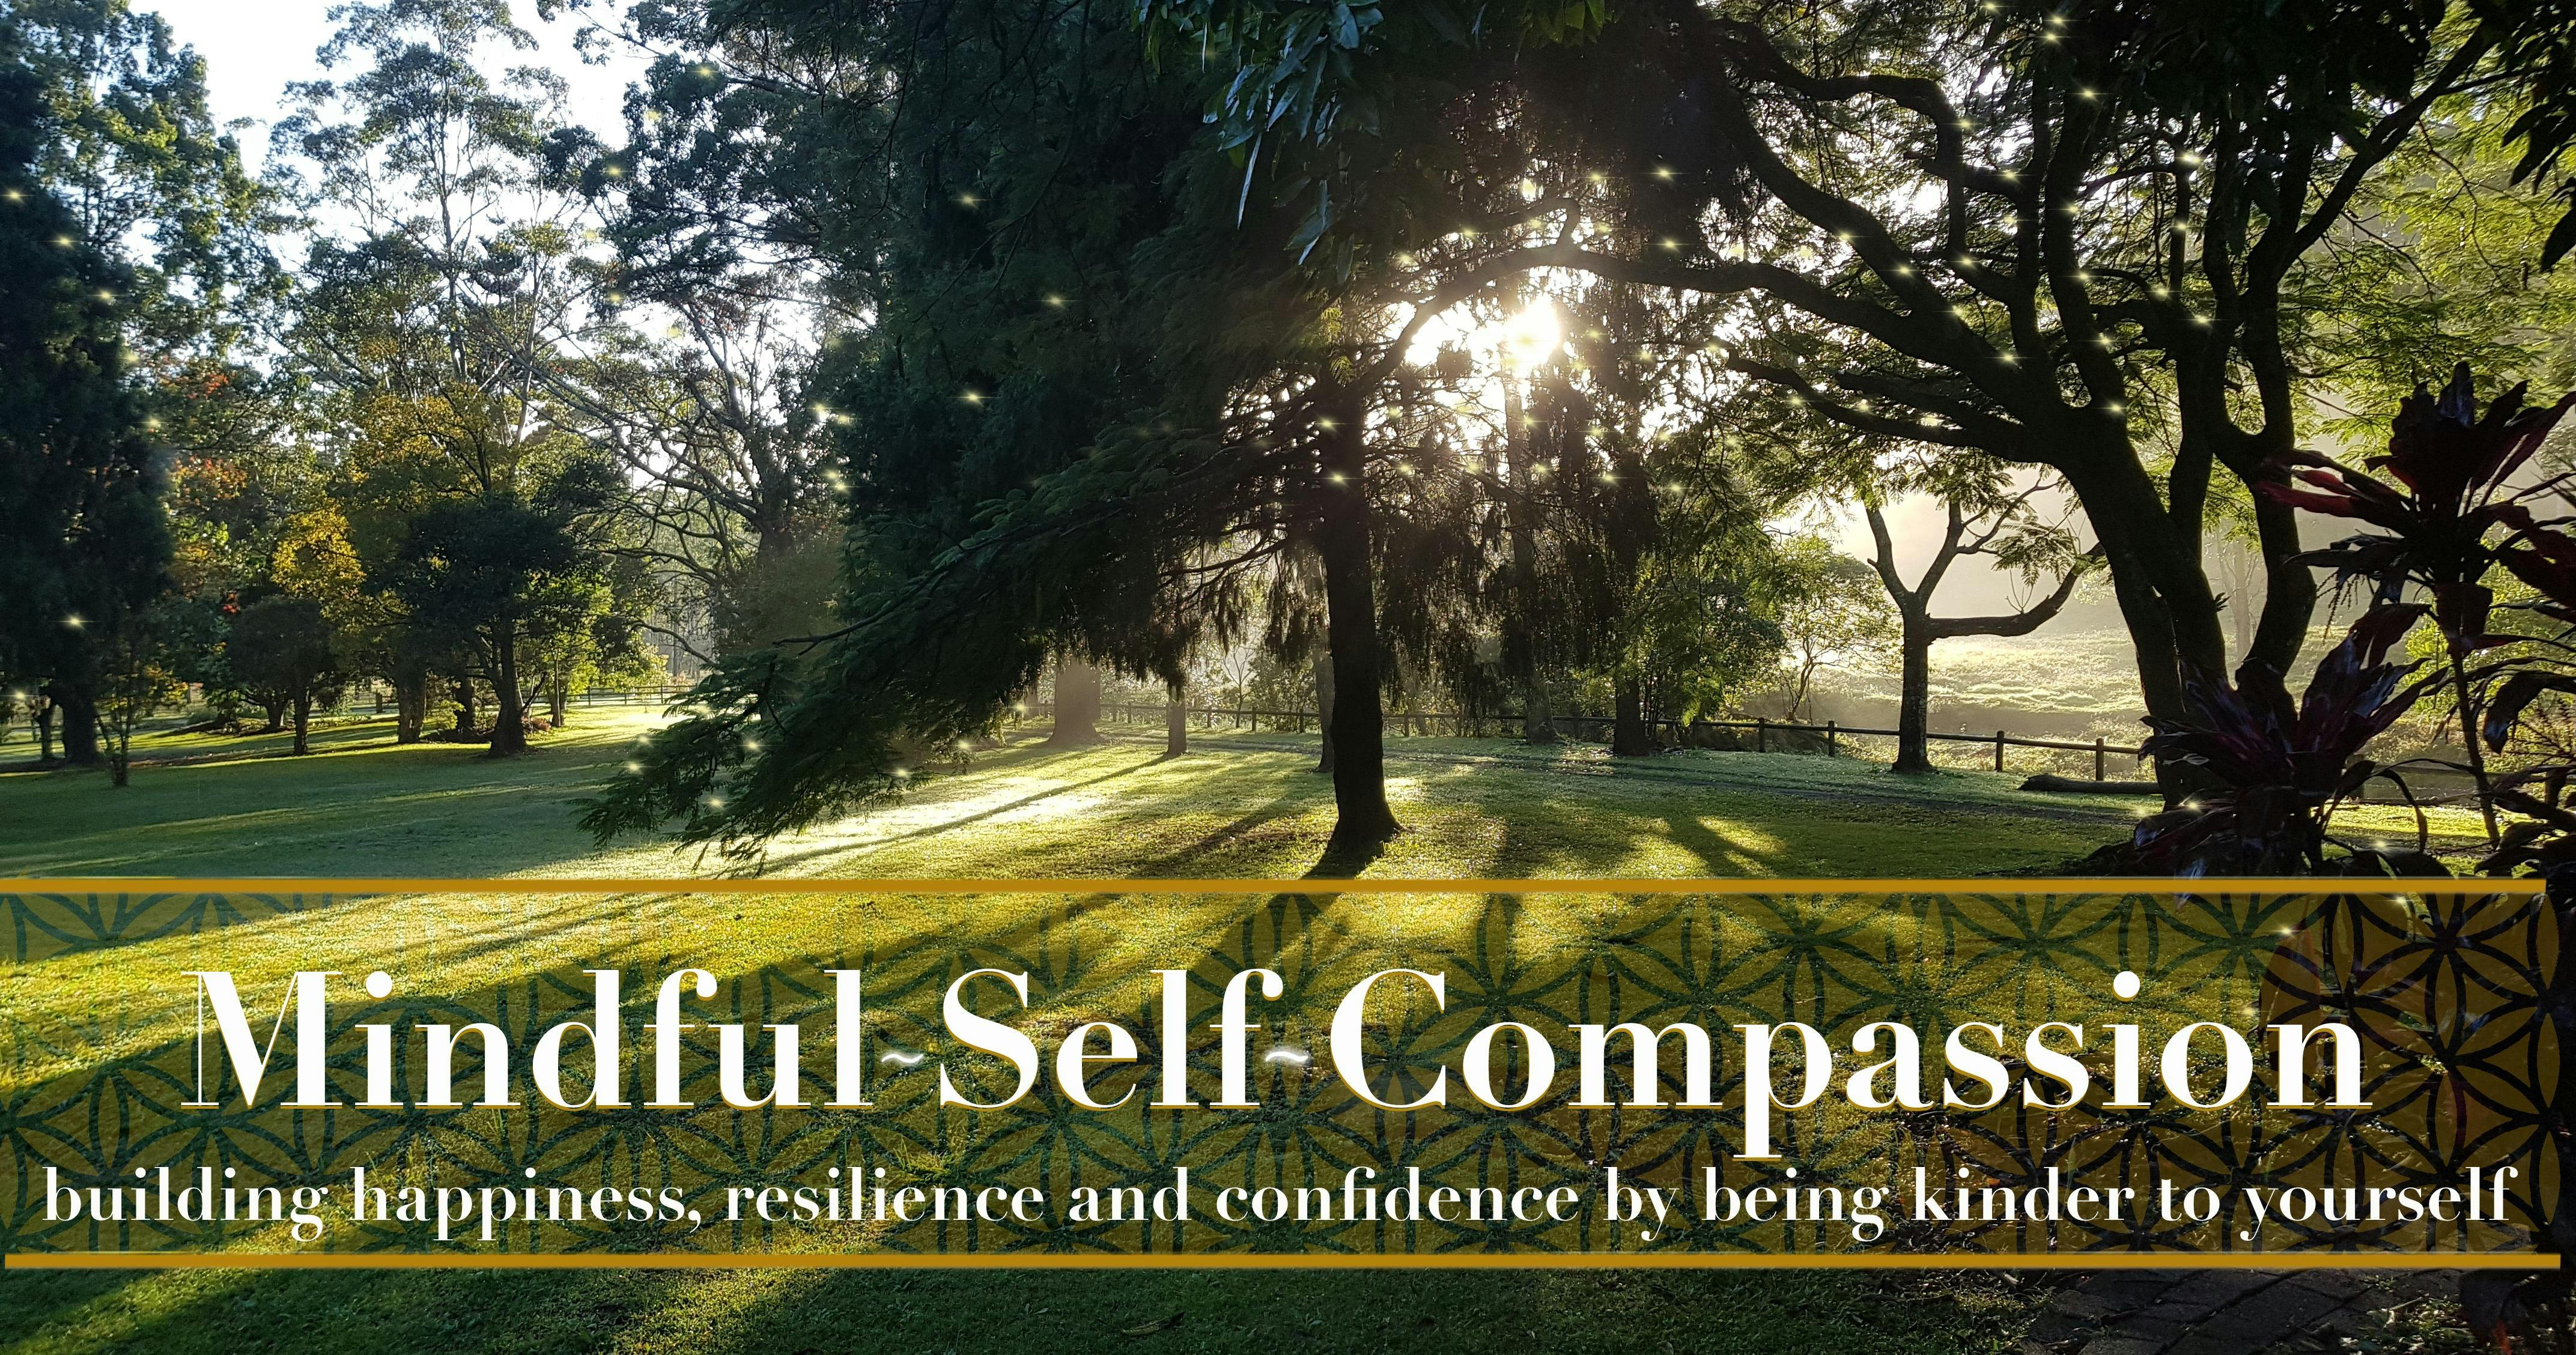 Mindful Self-Compassion skills training course in Ballina